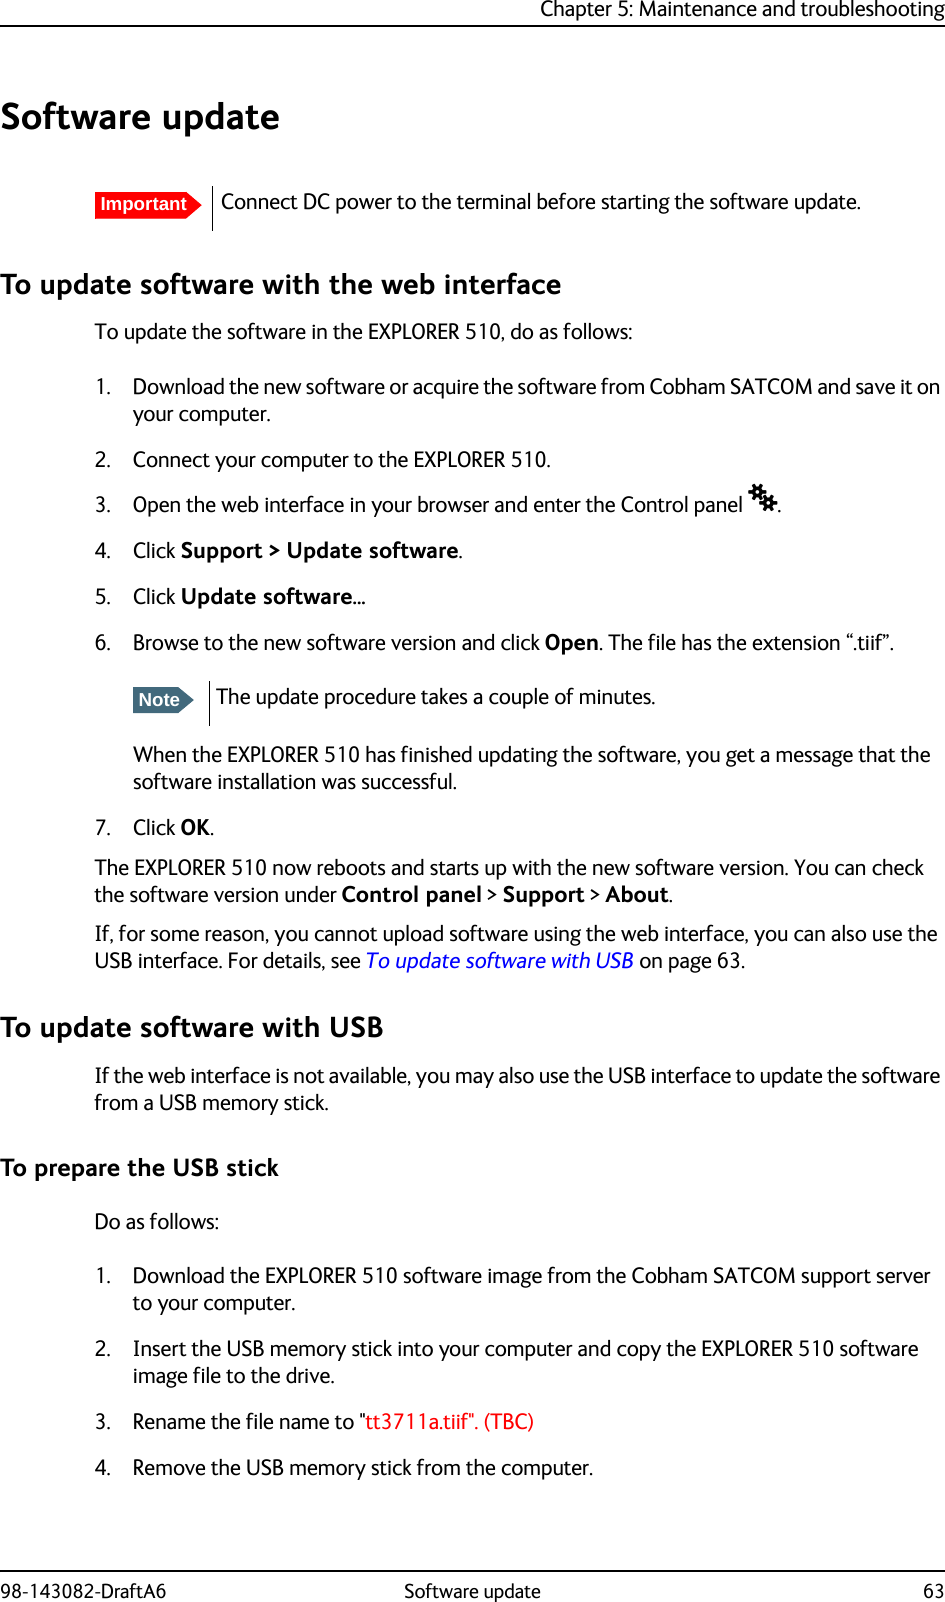 Chapter 5: Maintenance and troubleshooting98-143082-DraftA6 Software update 63Software updateTo update software with the web interfaceTo update the software in the EXPLORER 510, do as follows:1. Download the new software or acquire the software from Cobham SATCOM and save it on your computer.2. Connect your computer to the EXPLORER 510.3. Open the web interface in your browser and enter the Control panel .4. Click Support &gt; Update software.5. Click Update software... 6. Browse to the new software version and click Open. The file has the extension “.tiif”.When the EXPLORER 510 has finished updating the software, you get a message that the software installation was successful. 7. Click OK.The EXPLORER 510 now reboots and starts up with the new software version. You can check the software version under Control panel &gt; Support &gt; About.If, for some reason, you cannot upload software using the web interface, you can also use the USB interface. For details, see To update software with USB on page 63.To update software with USBIf the web interface is not available, you may also use the USB interface to update the software from a USB memory stick.To prepare the USB stickDo as follows:1. Download the EXPLORER 510 software image from the Cobham SATCOM support server to your computer.2. Insert the USB memory stick into your computer and copy the EXPLORER 510 software image file to the drive.3. Rename the file name to &quot;tt3711a.tiif&quot;. (TBC)4. Remove the USB memory stick from the computer. ImportantConnect DC power to the terminal before starting the software update.NoteThe update procedure takes a couple of minutes.